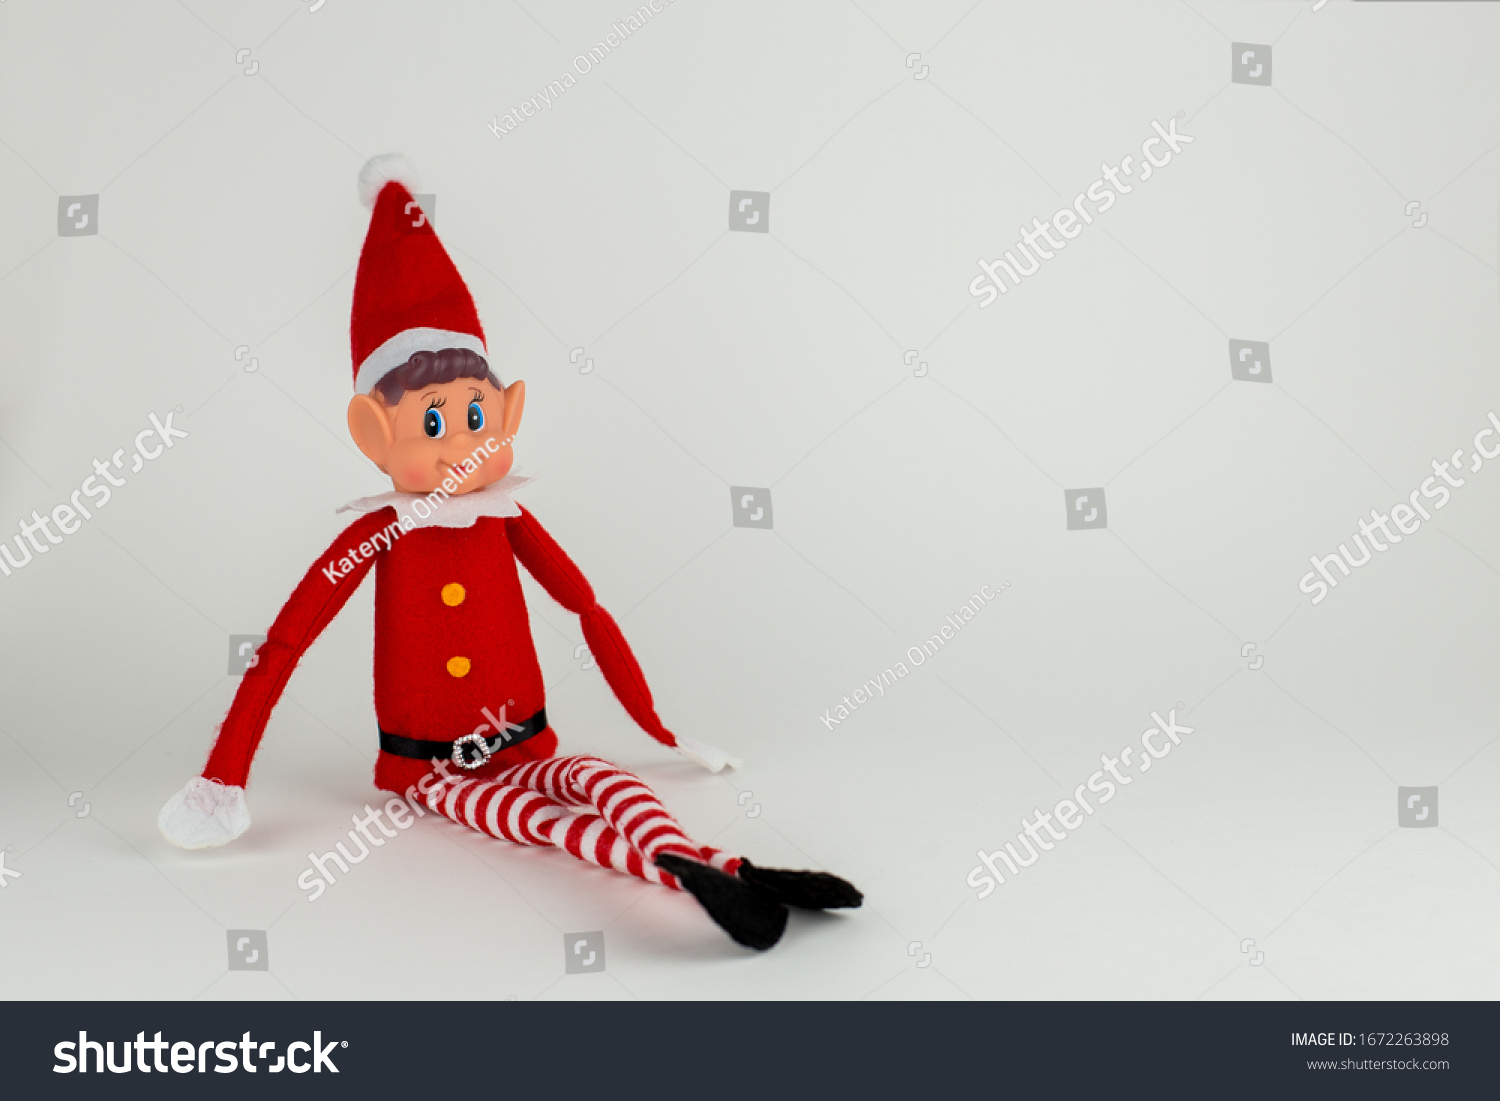 Elf toy on a white background. #1672263898